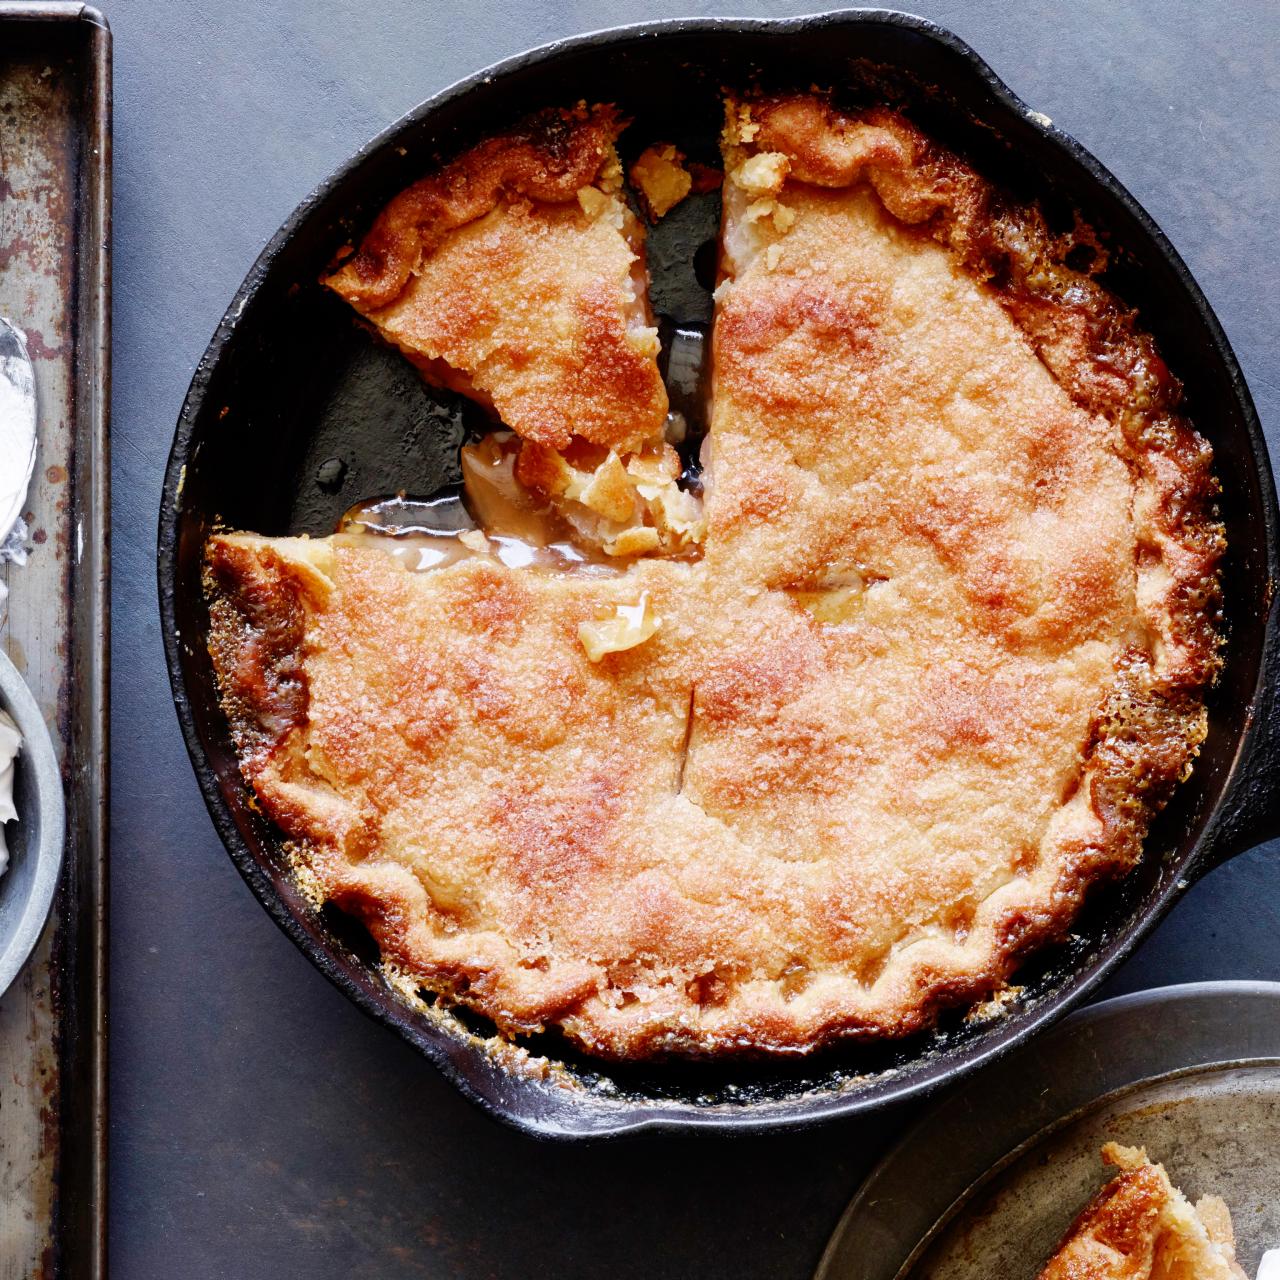 How to Bake a Pie in a Cast Iron Skillet